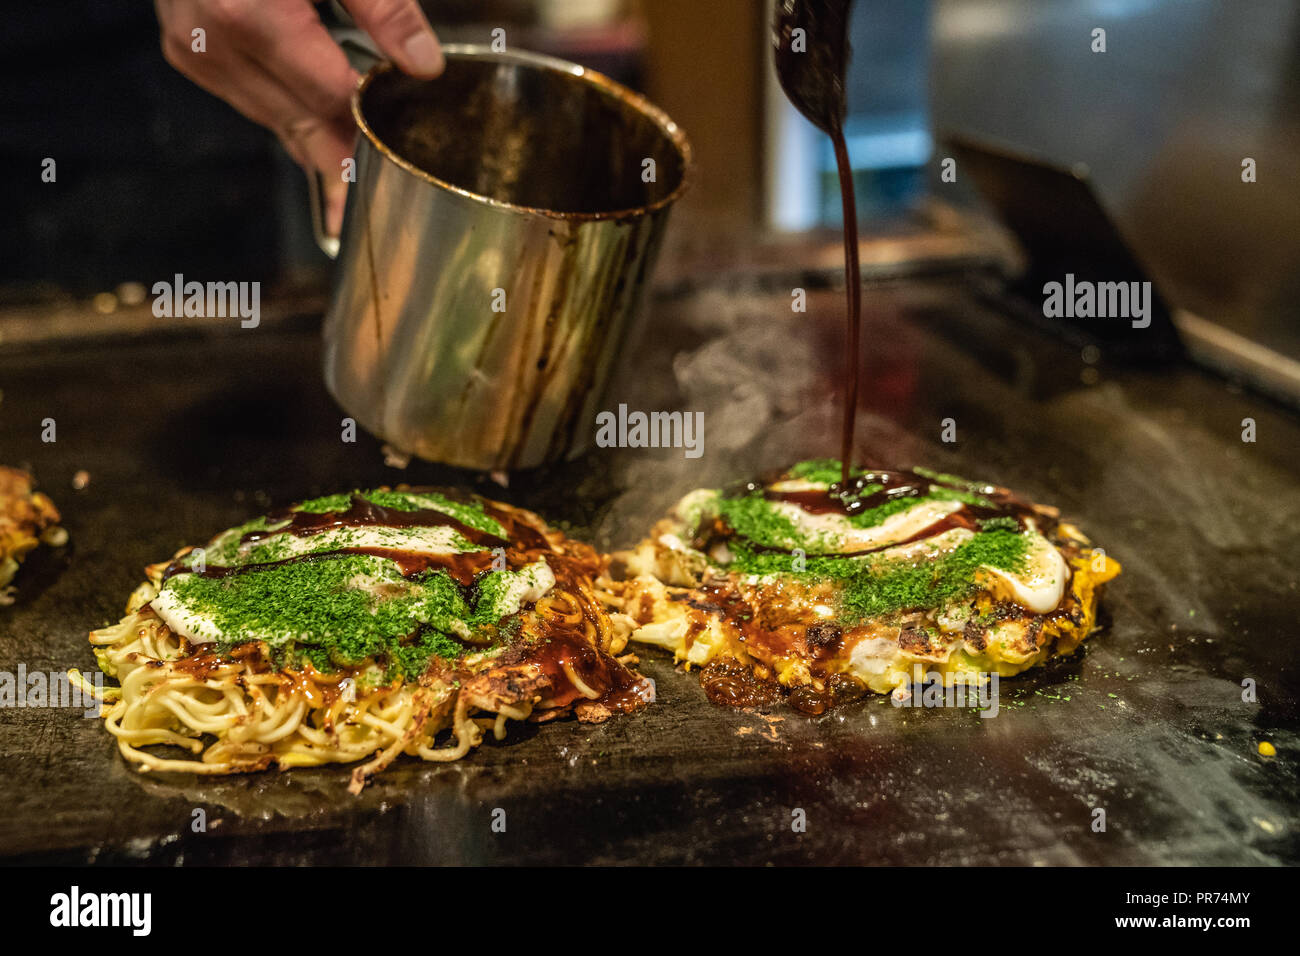 the delicious okonomiyaki is almost done on the iron plate, the cook is adding some japanese traditional sauce Stock Photo